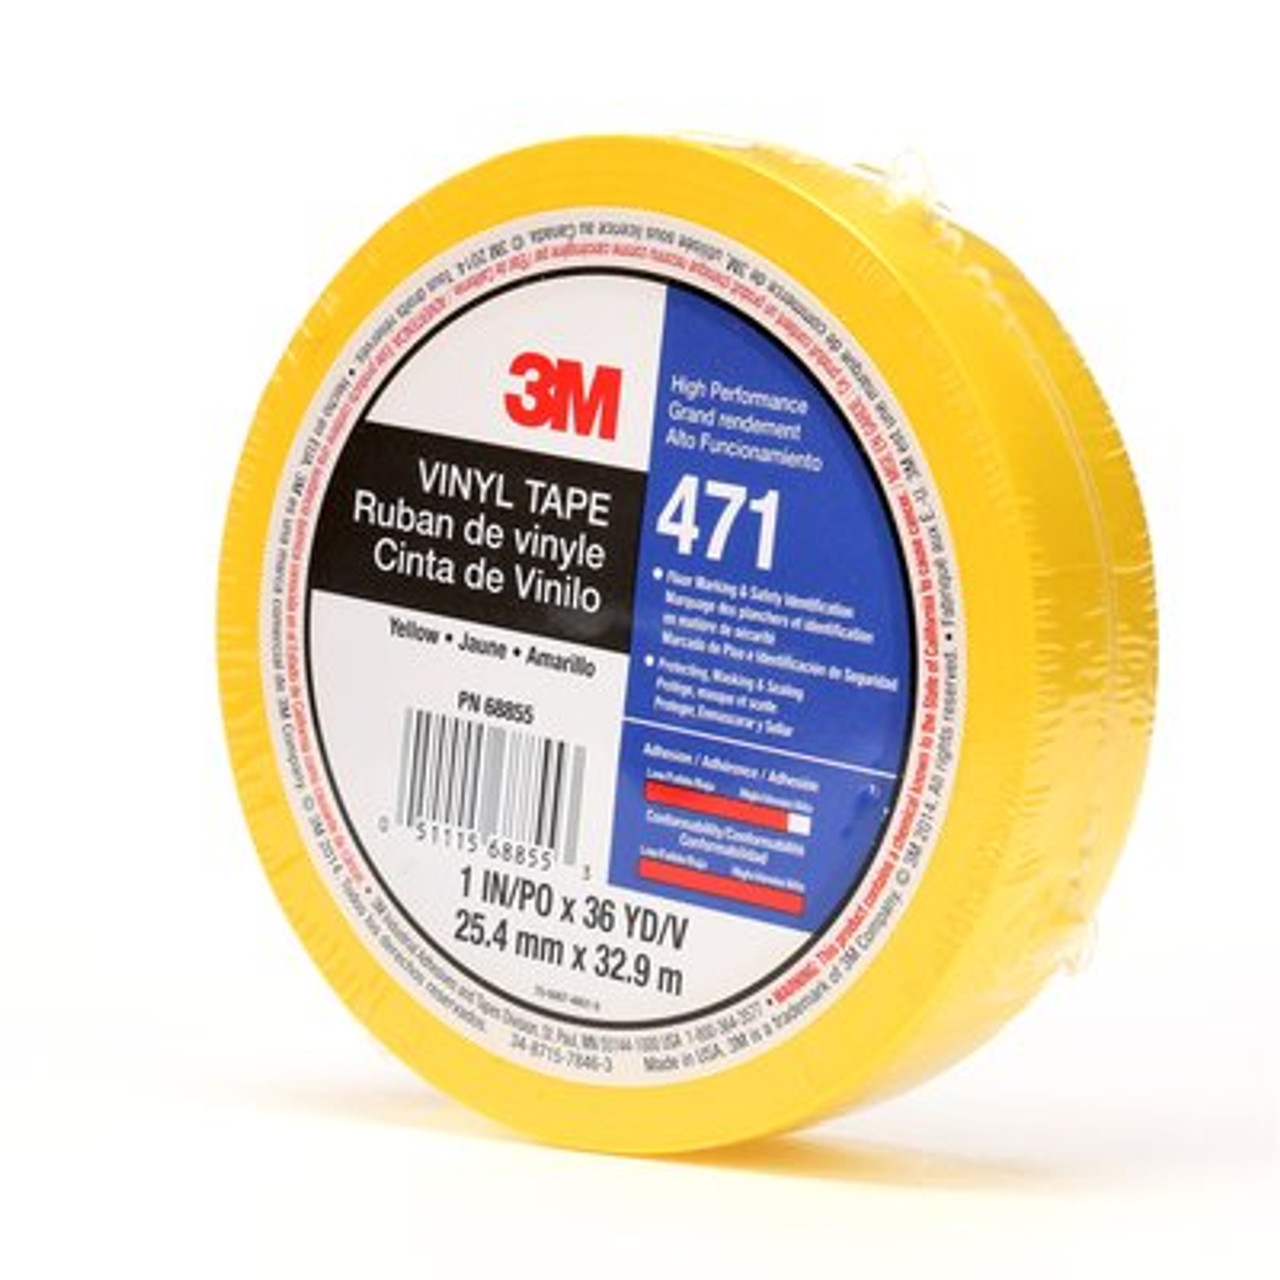 3M™ Vinyl Tape 471, Yellow, 1 in x 36 yd, 5.2 mil Individually wrapped